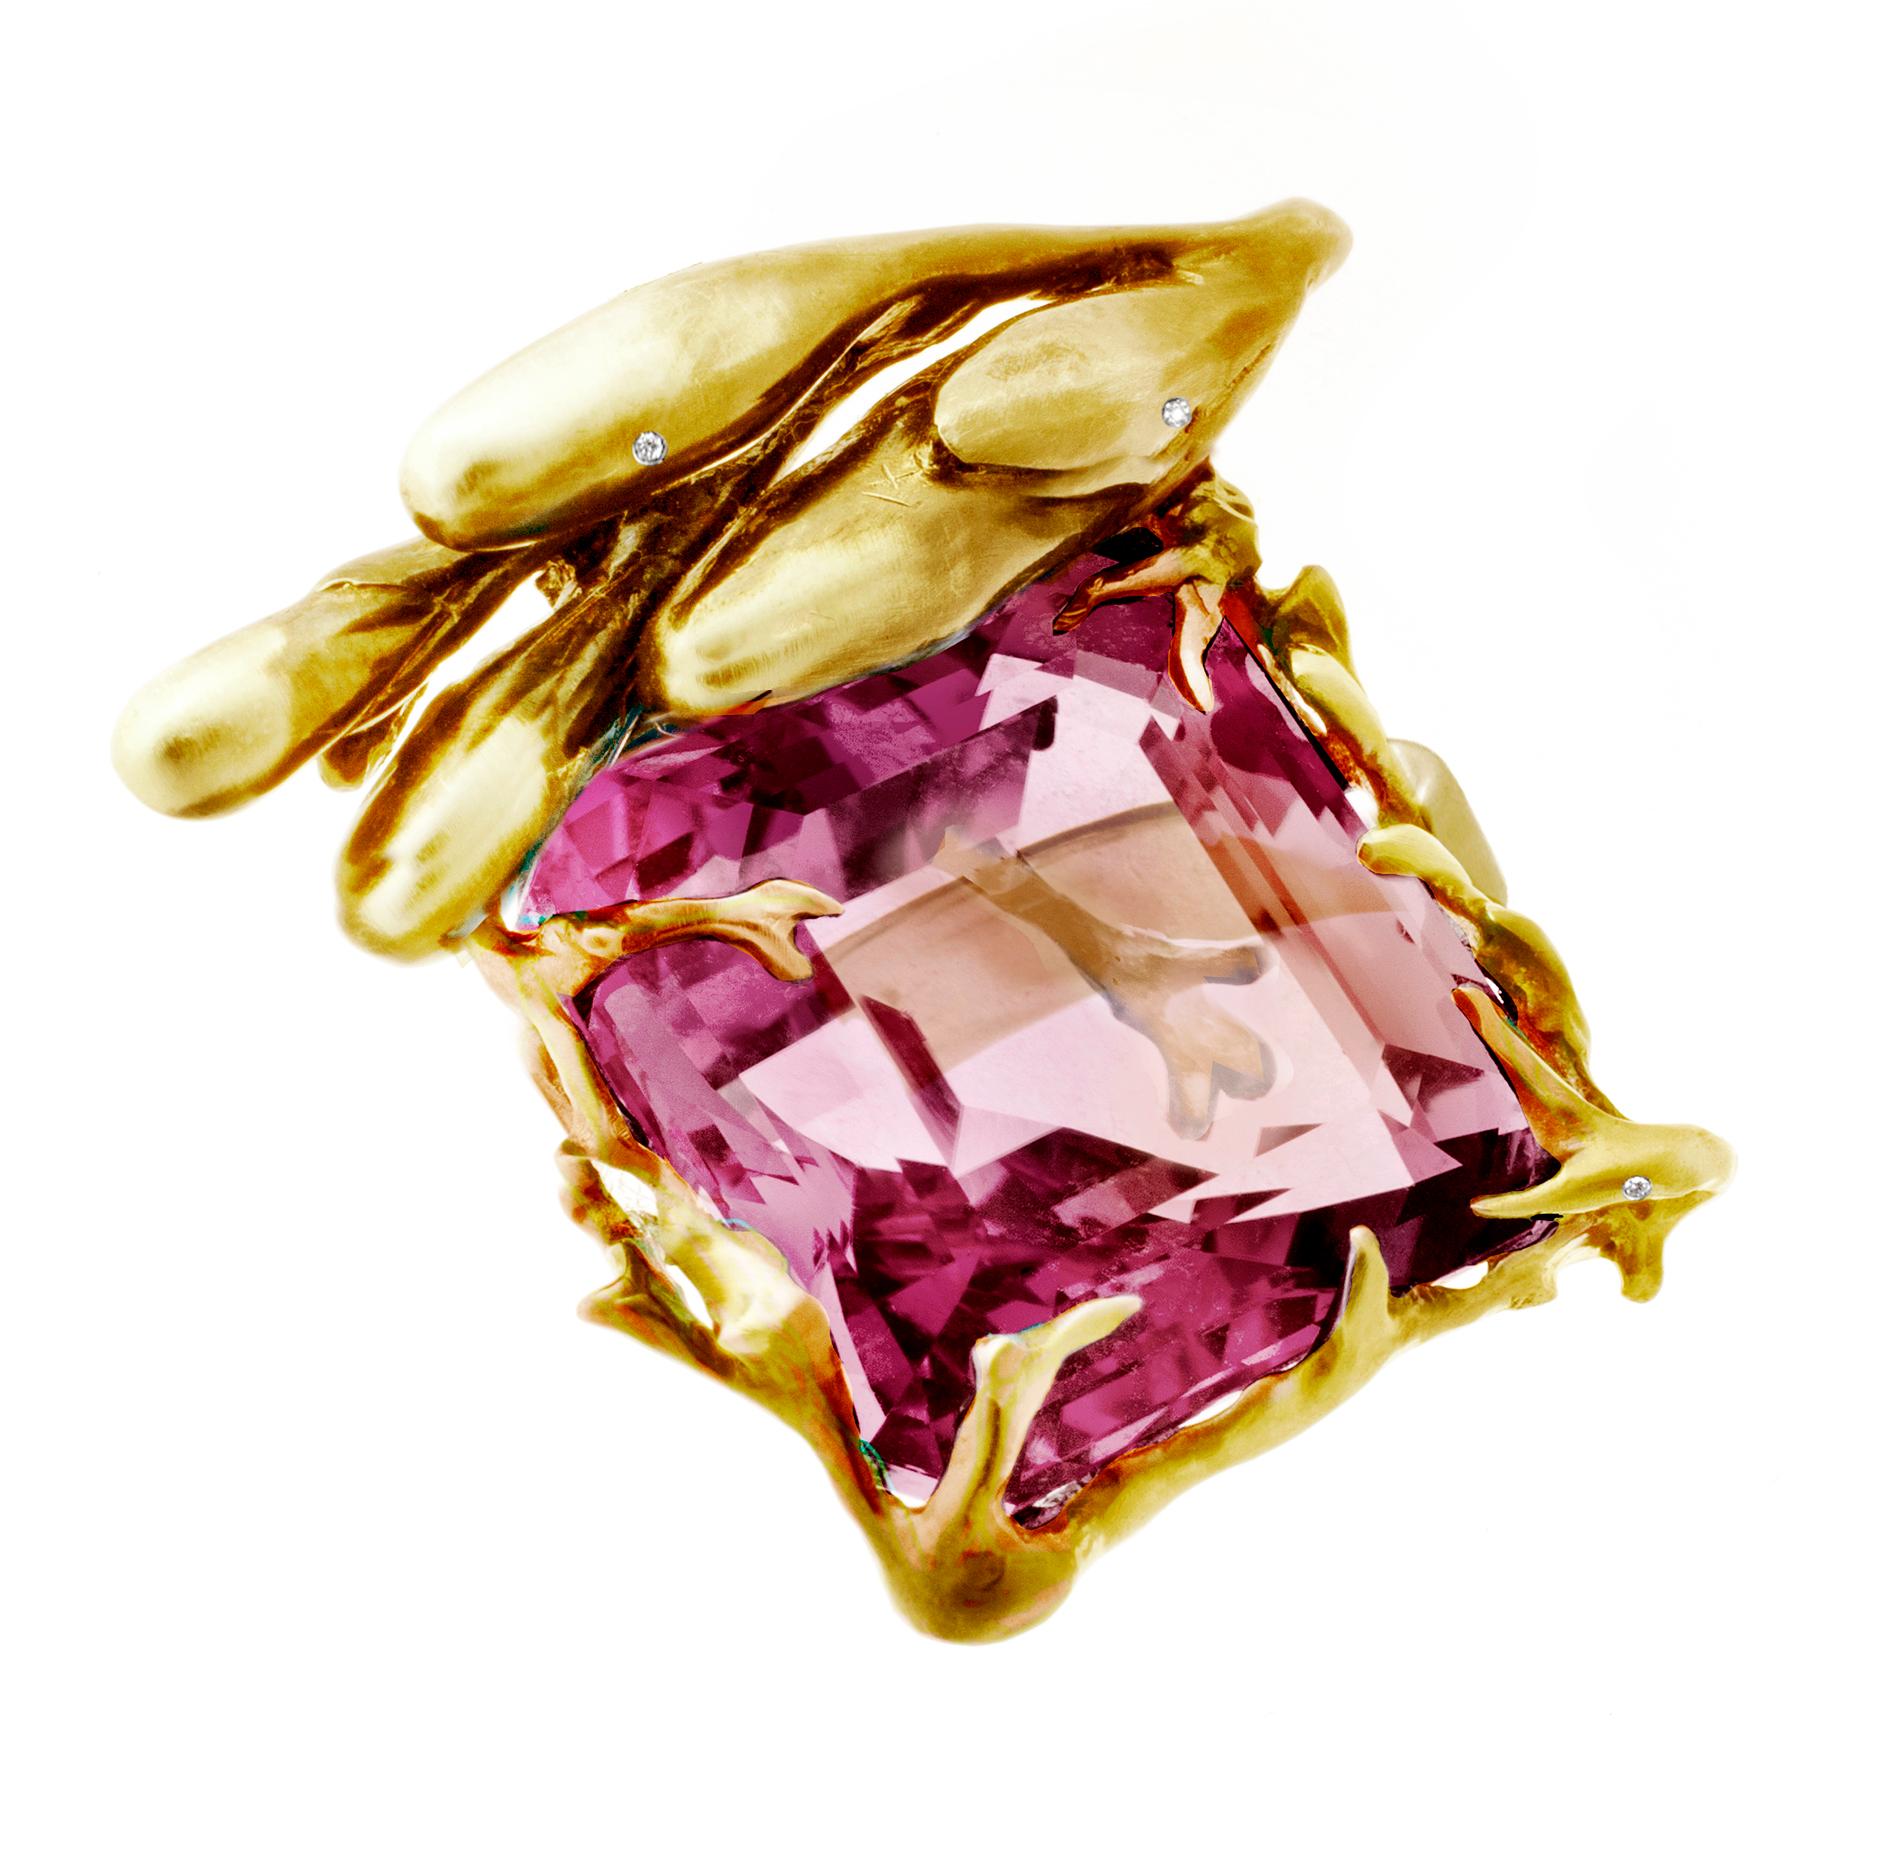 The center of this 18 karat yellow gold Fairy Tale engagement ring is a 17.03-carat GRS certified pink Burma spinel. The dimensions of the gem are 17.66 x 13.92 x 7.35 mm.

The spinel has an exquisite liquid light play on its surface, which is